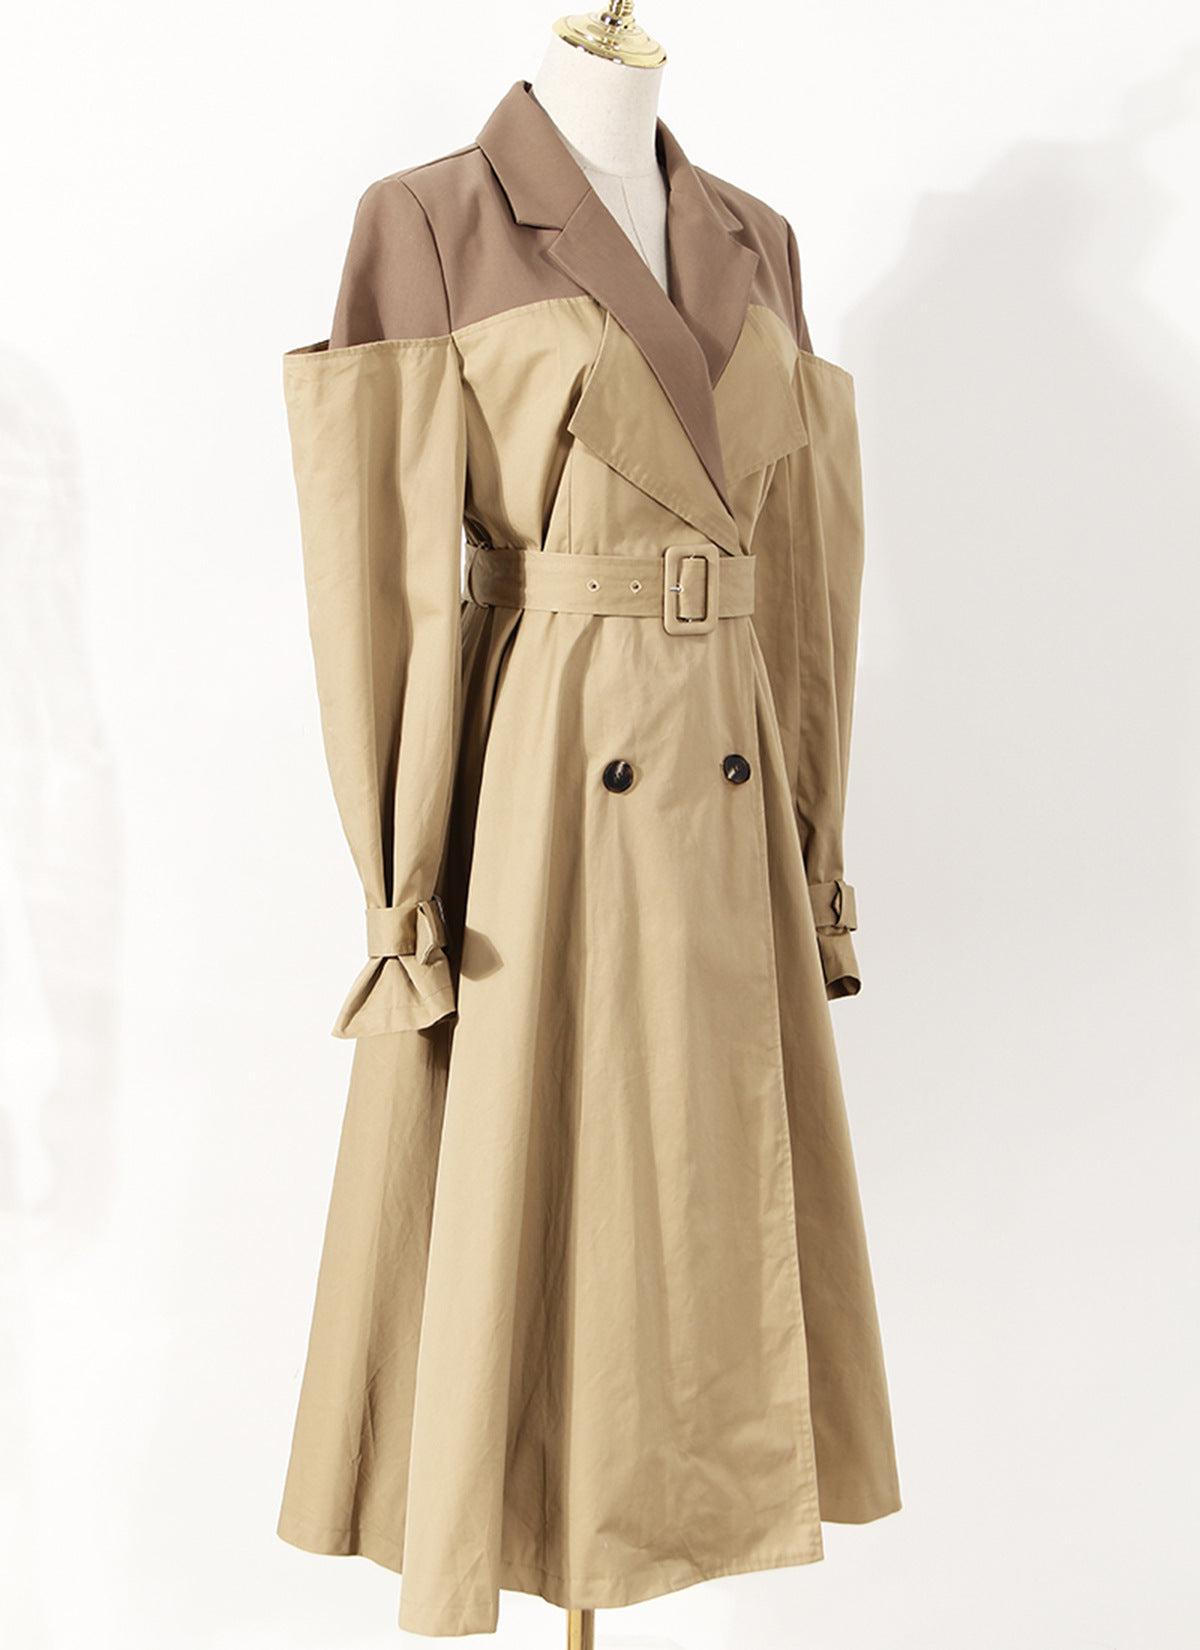 Dream Architect Two Color Collar Trench Coat iYoowe DropShipping